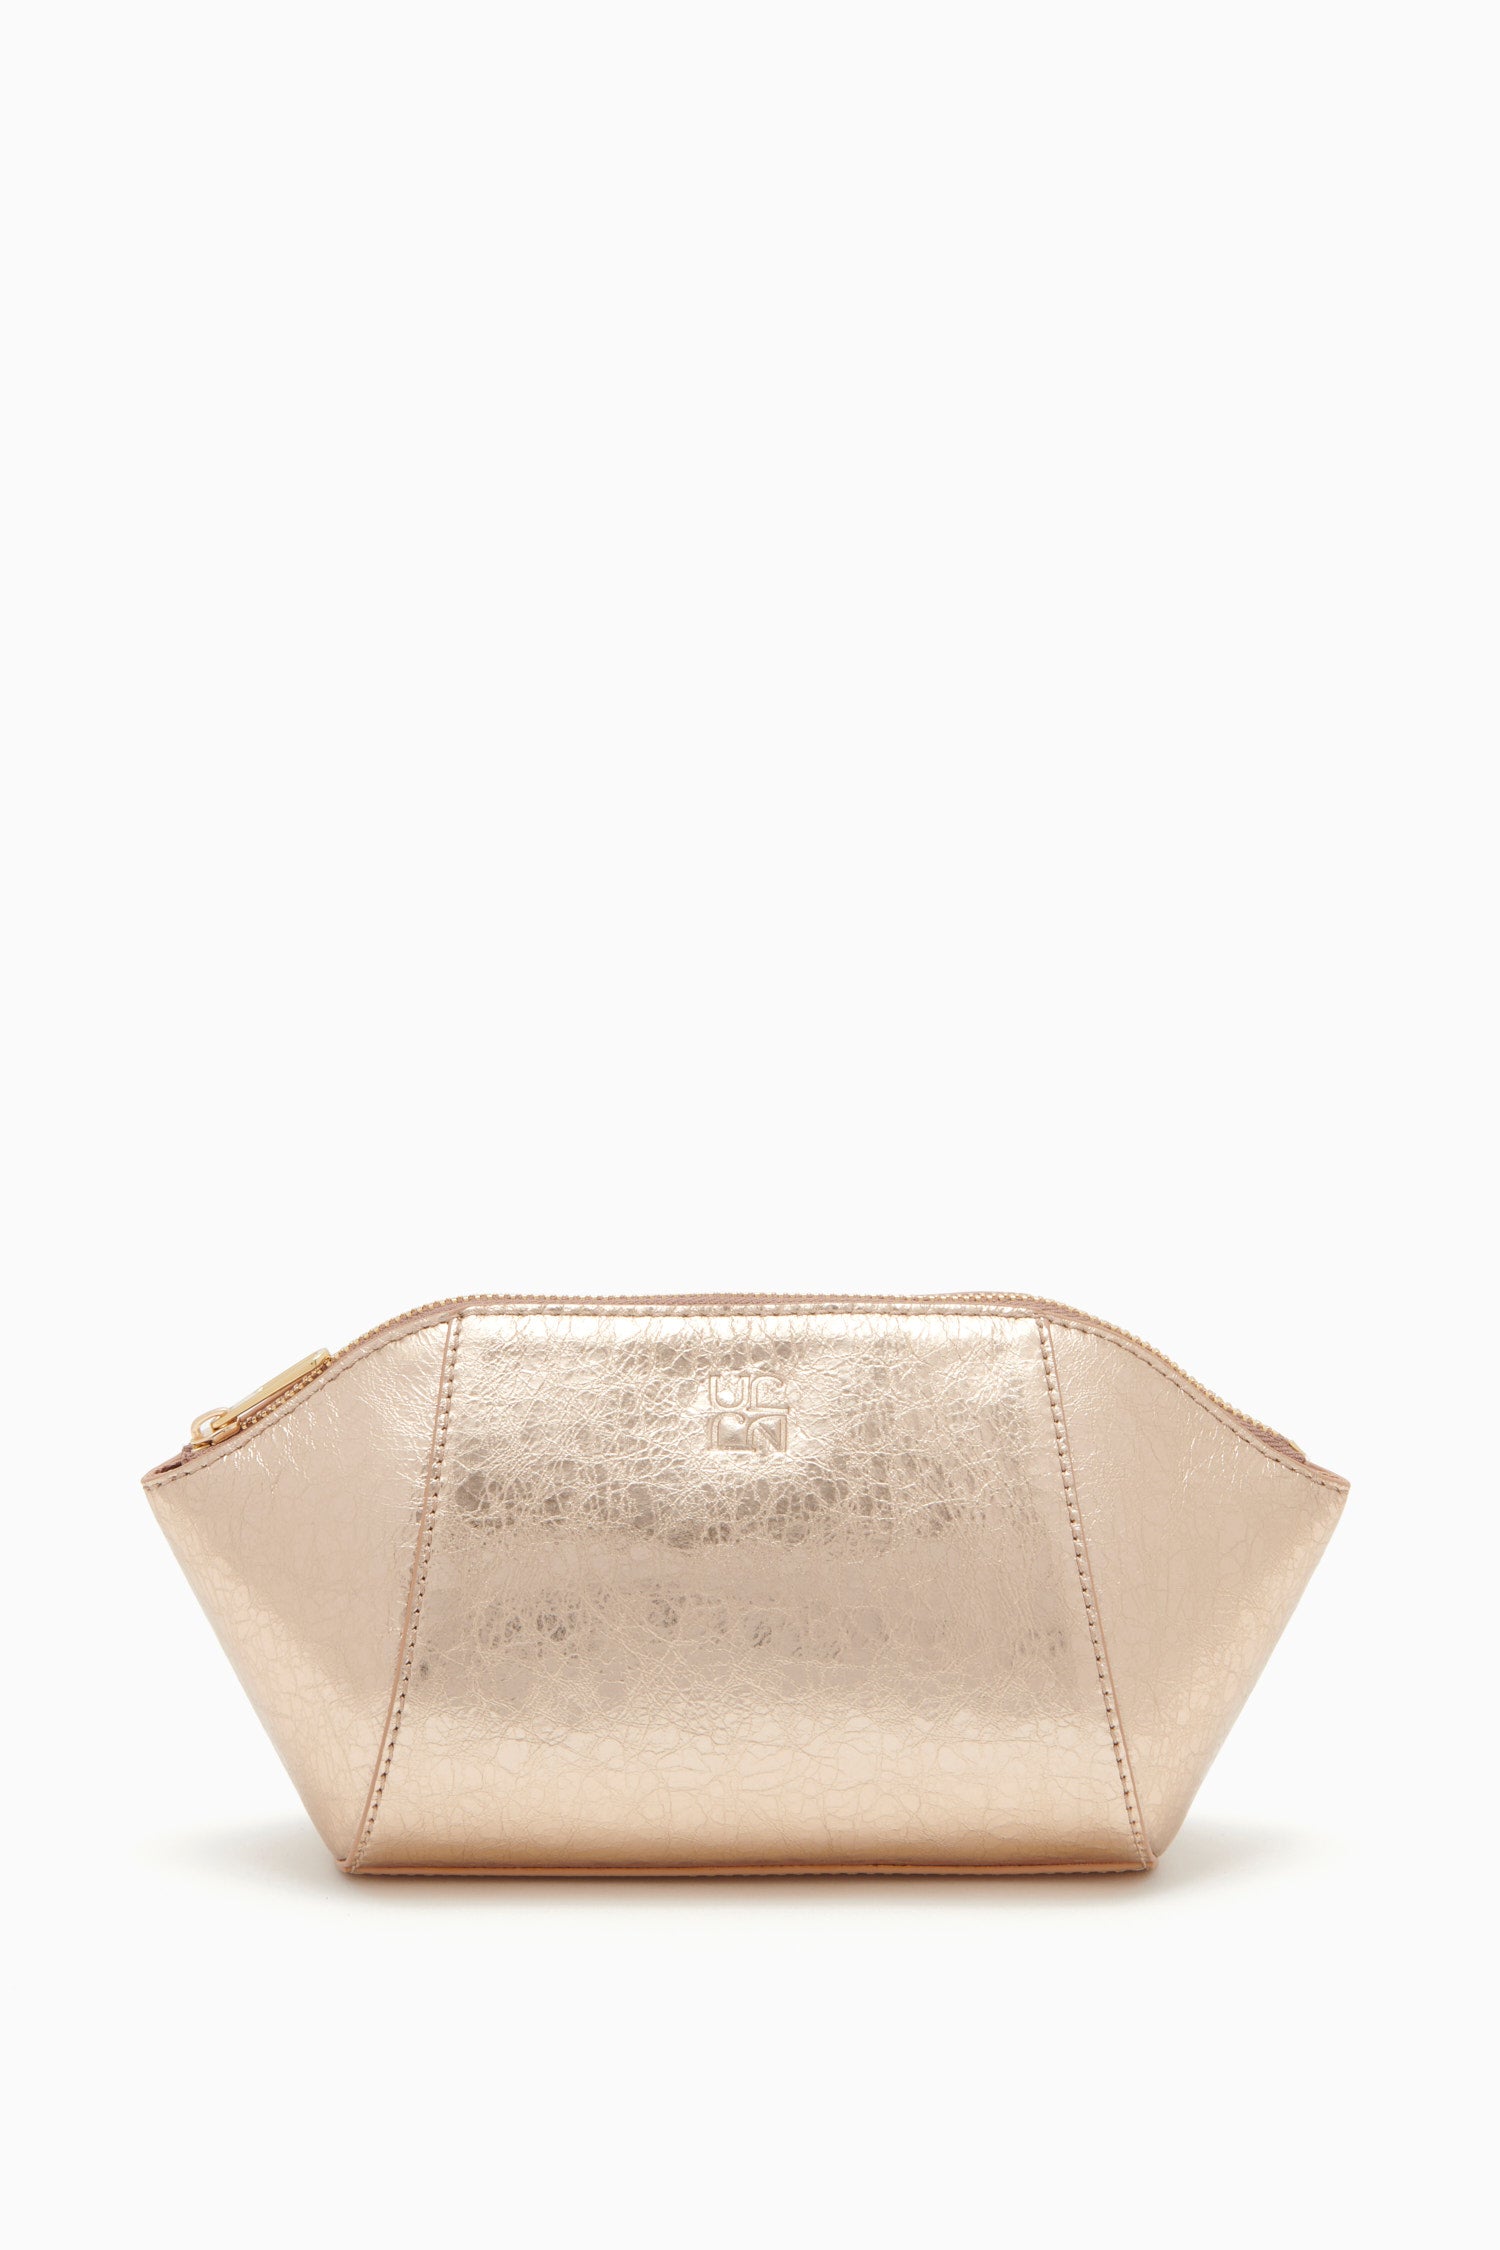 Ulla Johnson Women's Imogen Large Makeup Pouch in Champagne